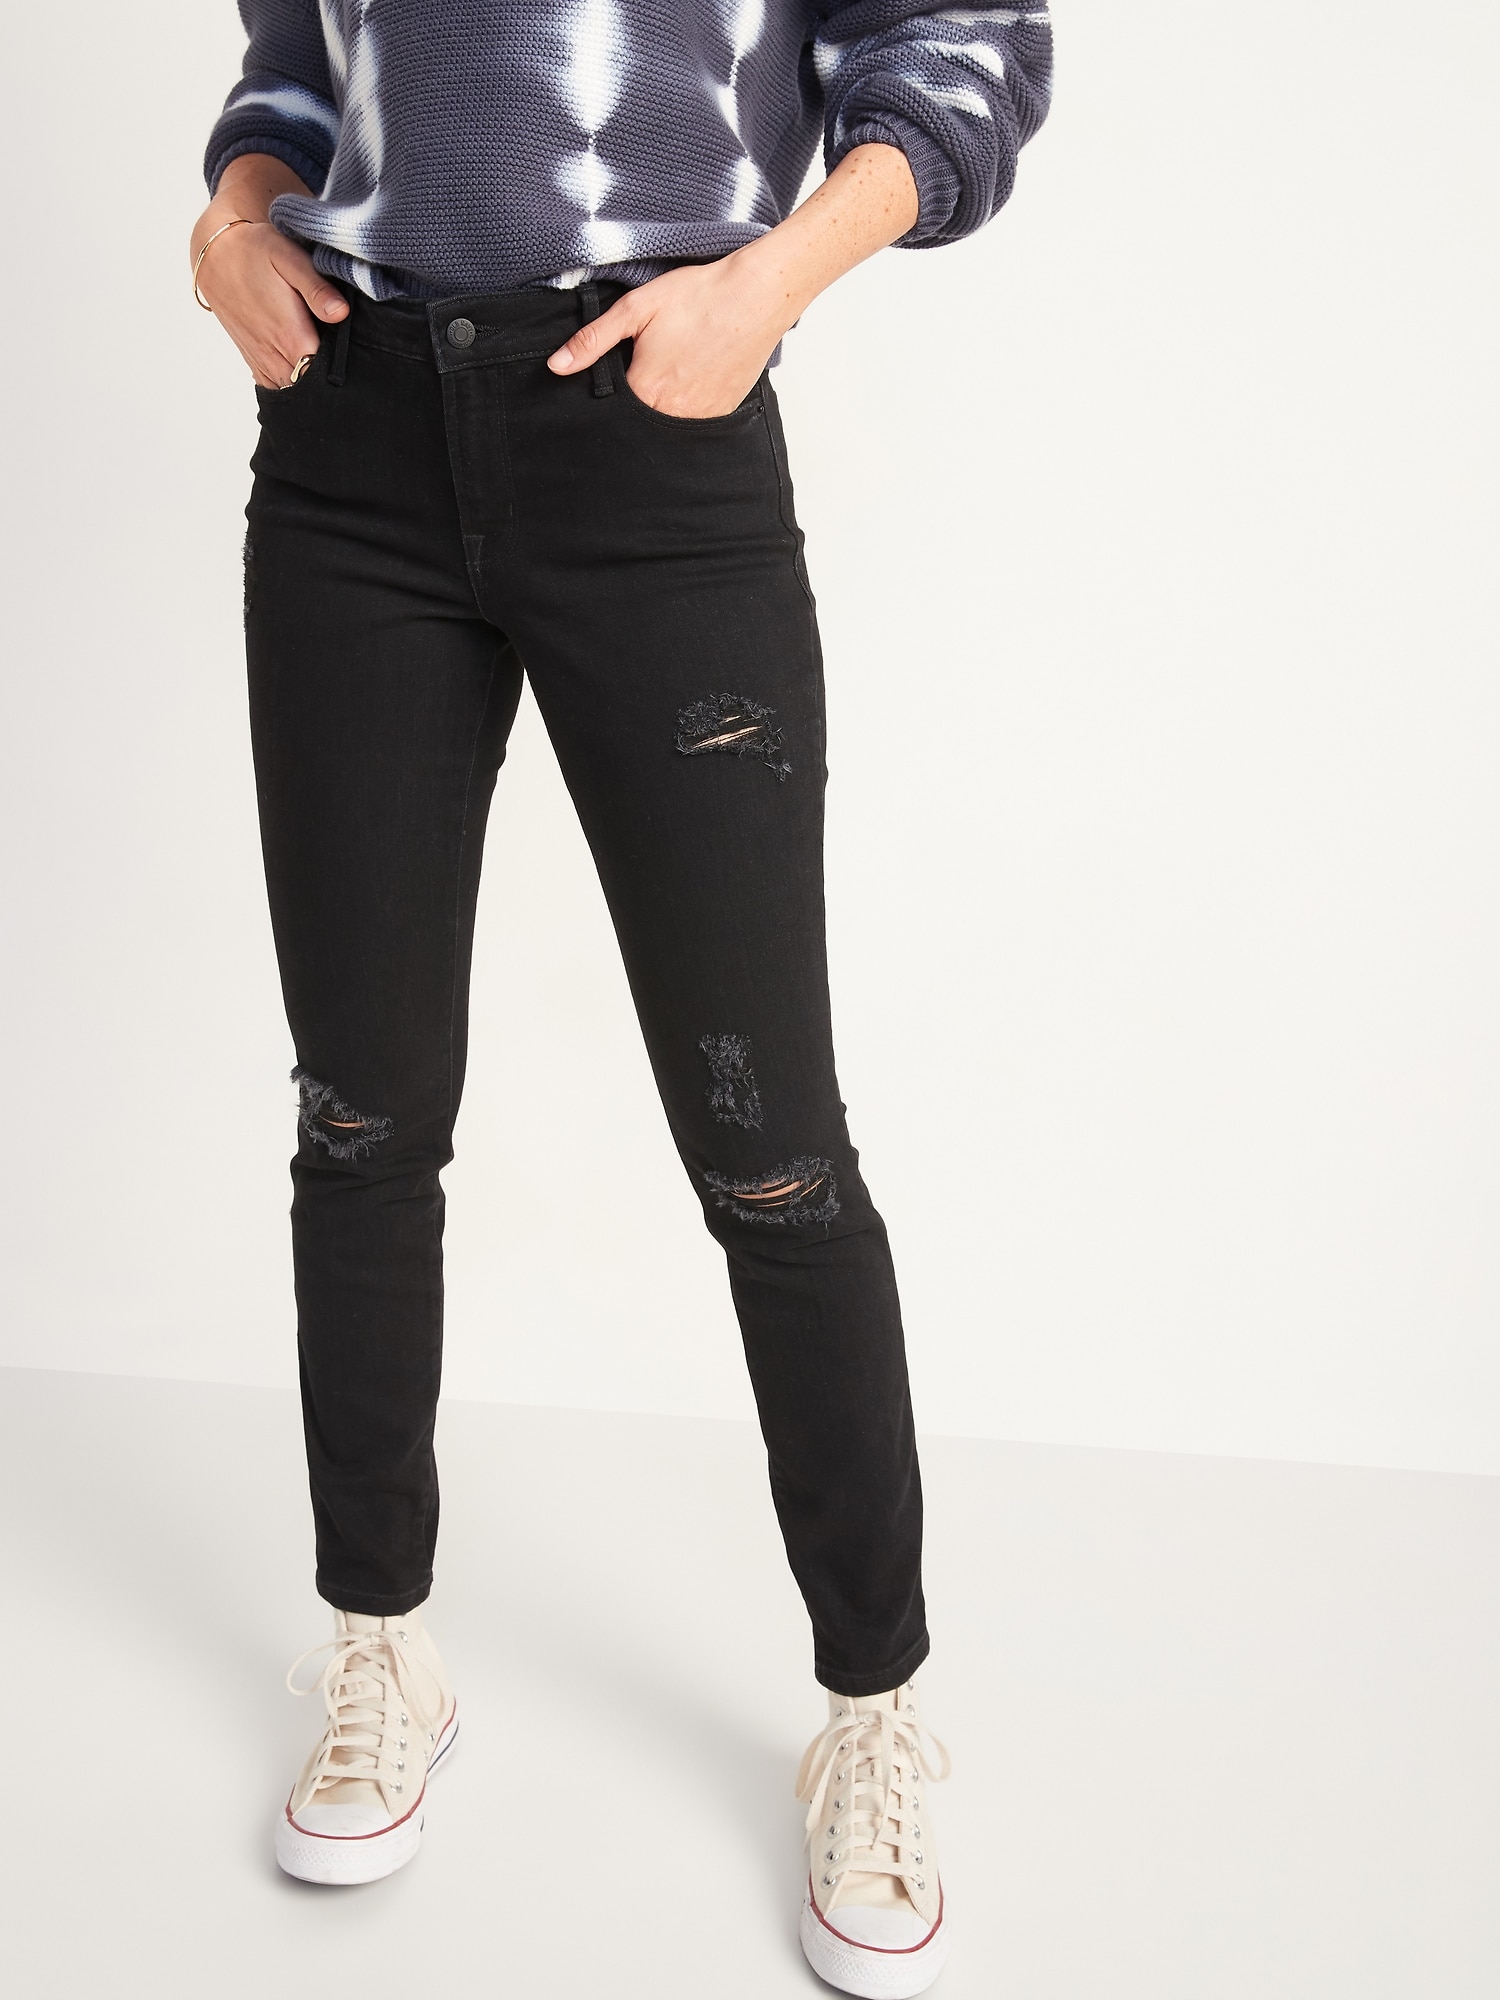 Mid Rise Pop Icon Black Wash Ripped Skinny Jeans For Women Old Navy